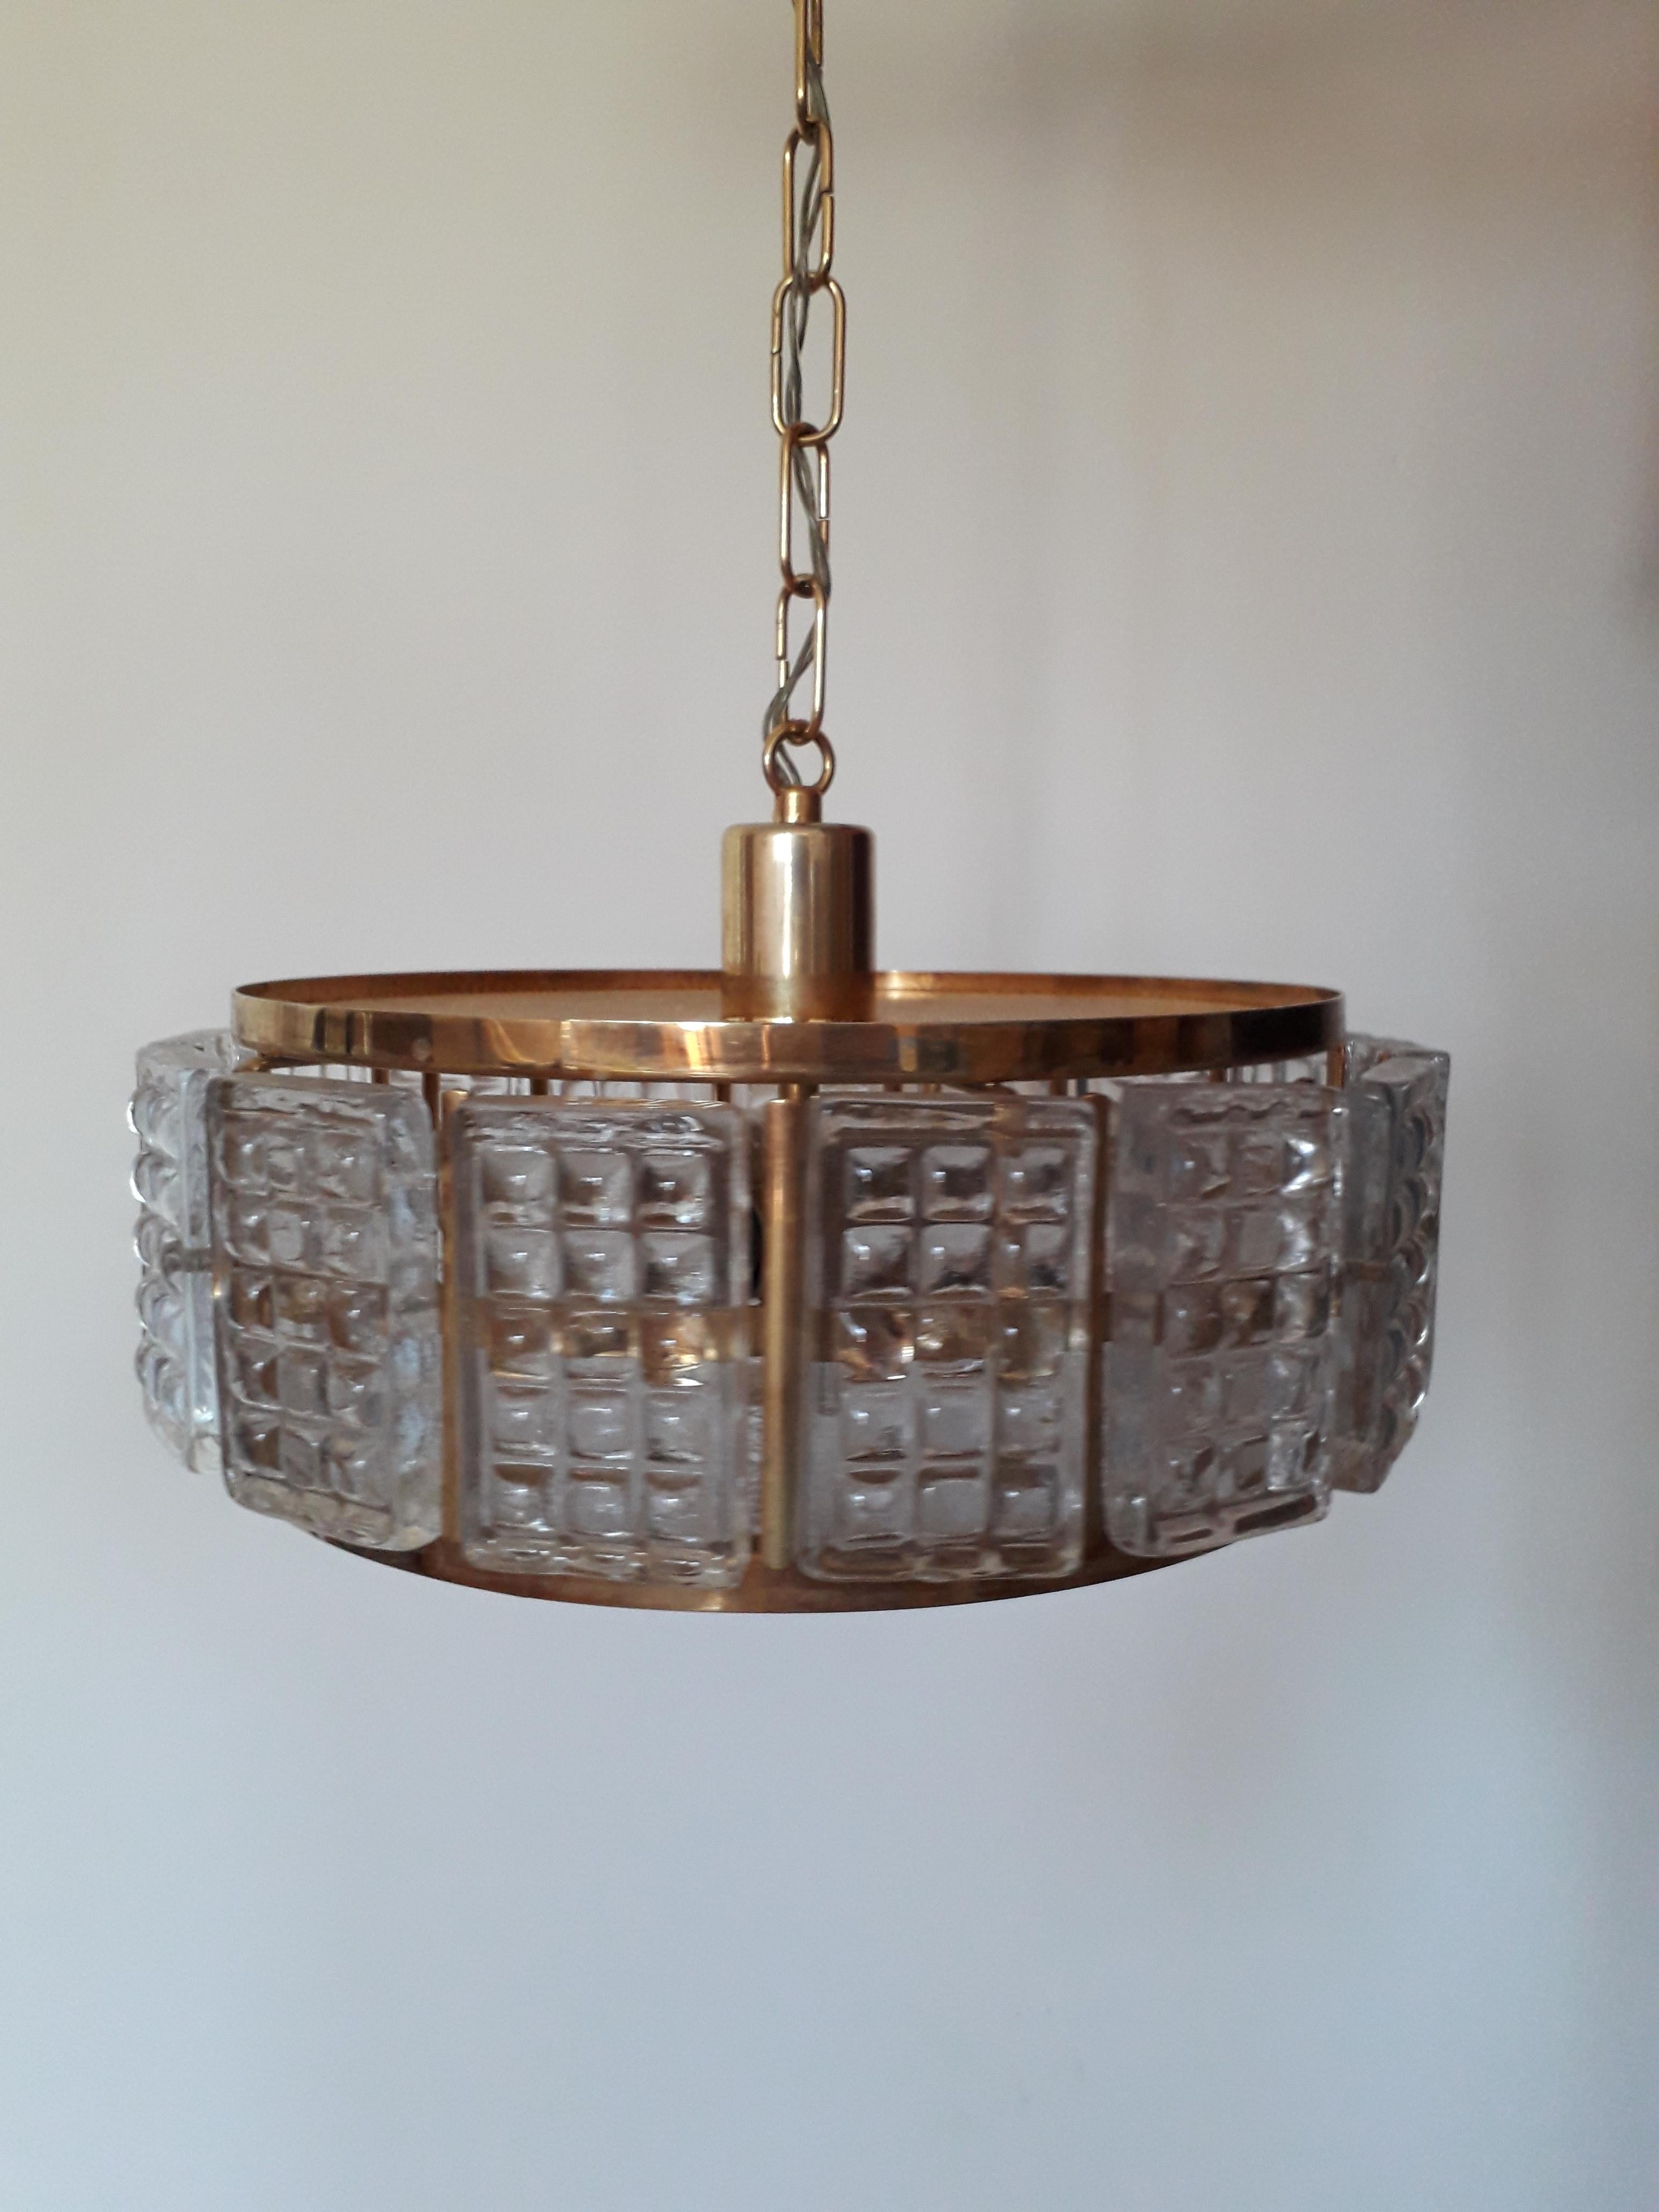 Swedish Glass and Brass Chandelier By Carl Fangerlund For Orrefors 1970s For Sale